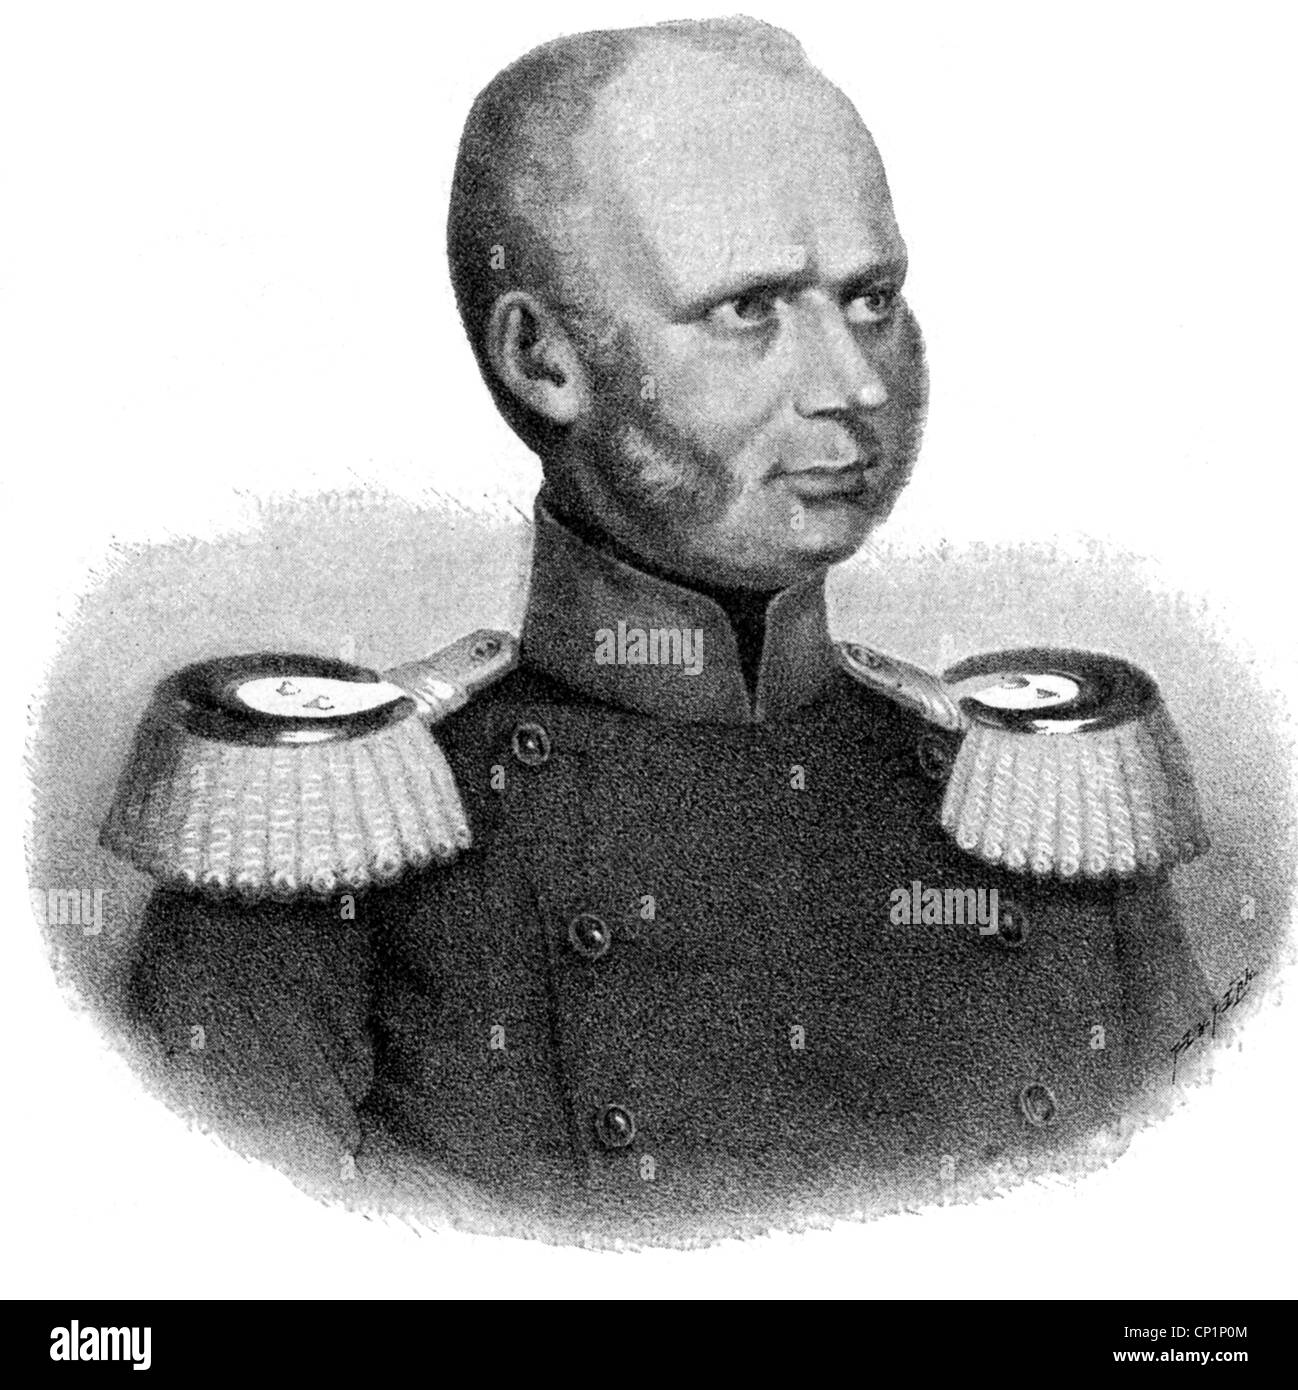 Brandenburg, Friedrich Wilhelm count of, 24.1.1792 - 6.11.1850, Prussian general and politician, Prime Minister of Prussia 2.11.1848 - 6.11.1850, portrait, lithograph, 19th century, Stock Photo